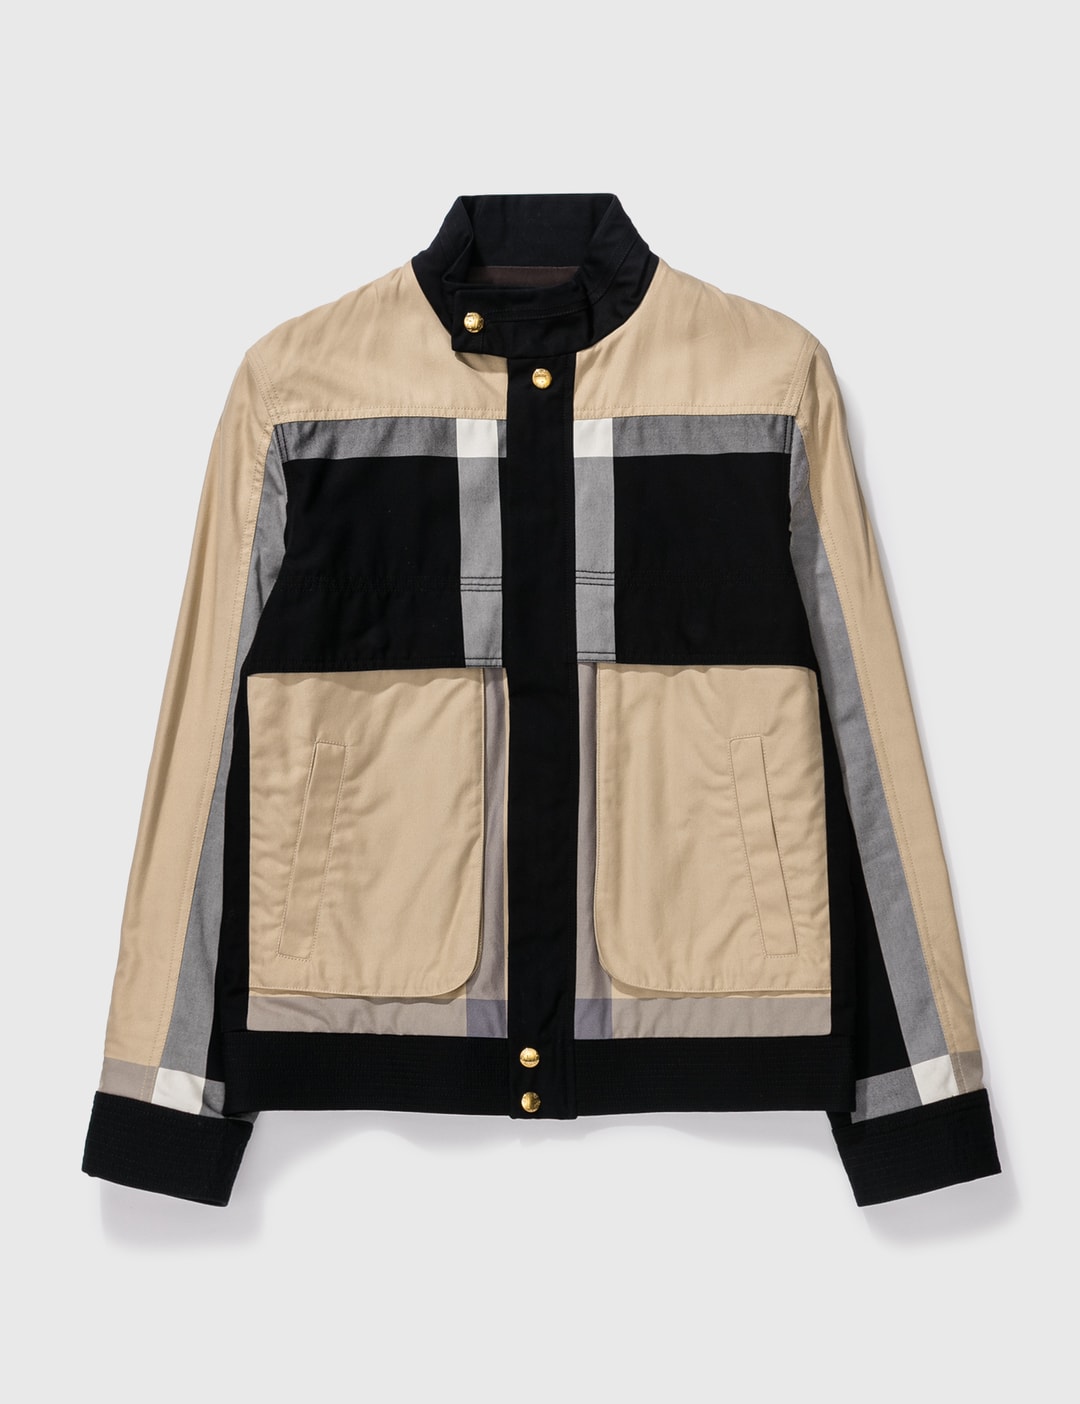 Louis Vuitton - LOUIS VUITTON PATCH WORK ZIPUP JACKET  HBX - Globally  Curated Fashion and Lifestyle by Hypebeast